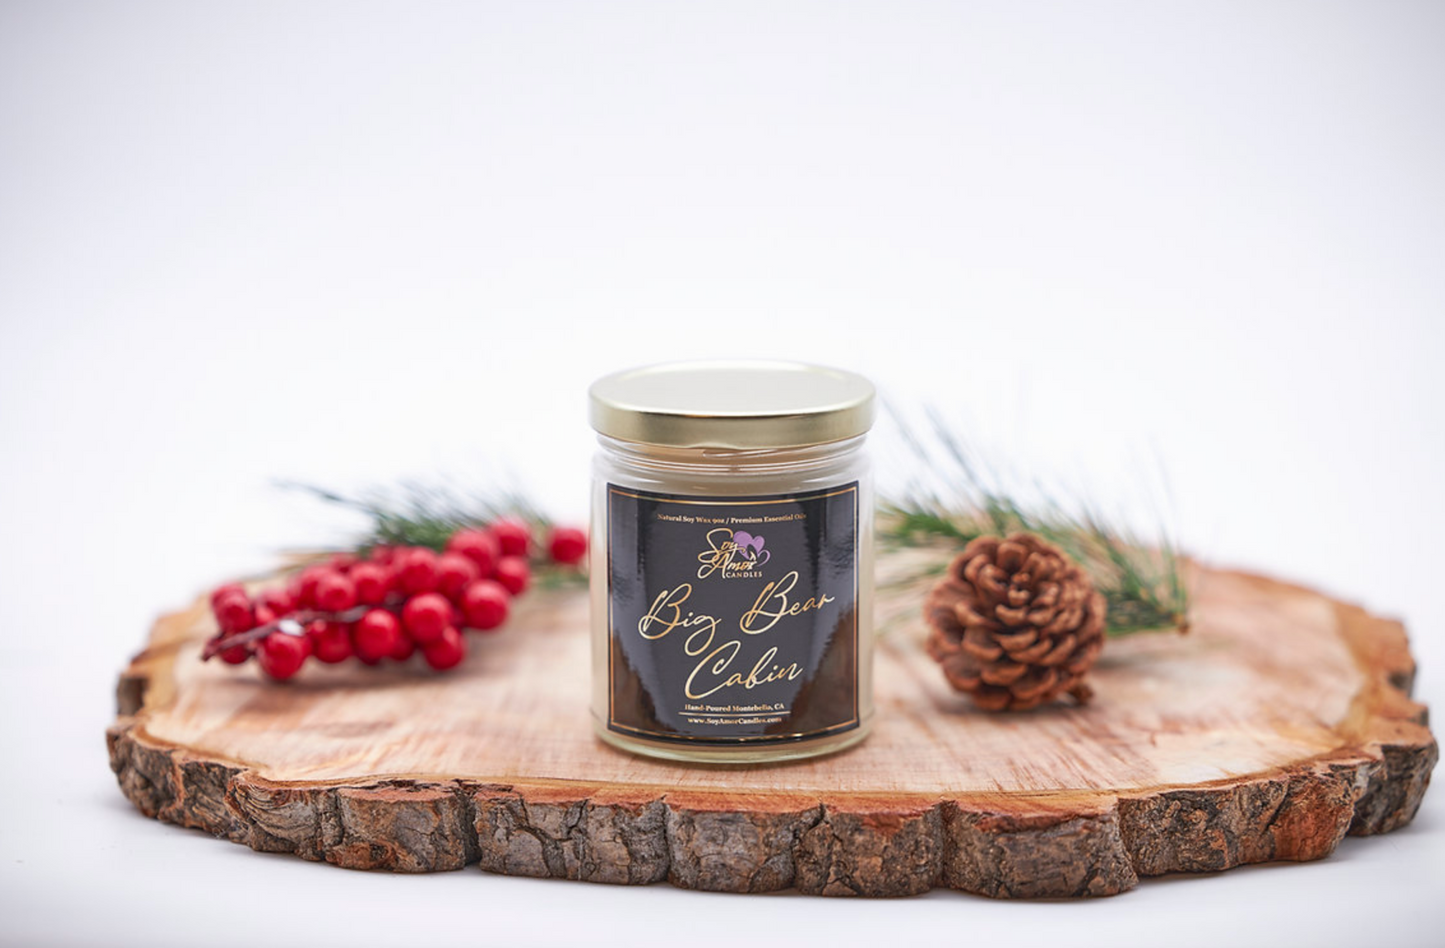 "Big Bear Cabin" 9 oz Candle by Soy Amore